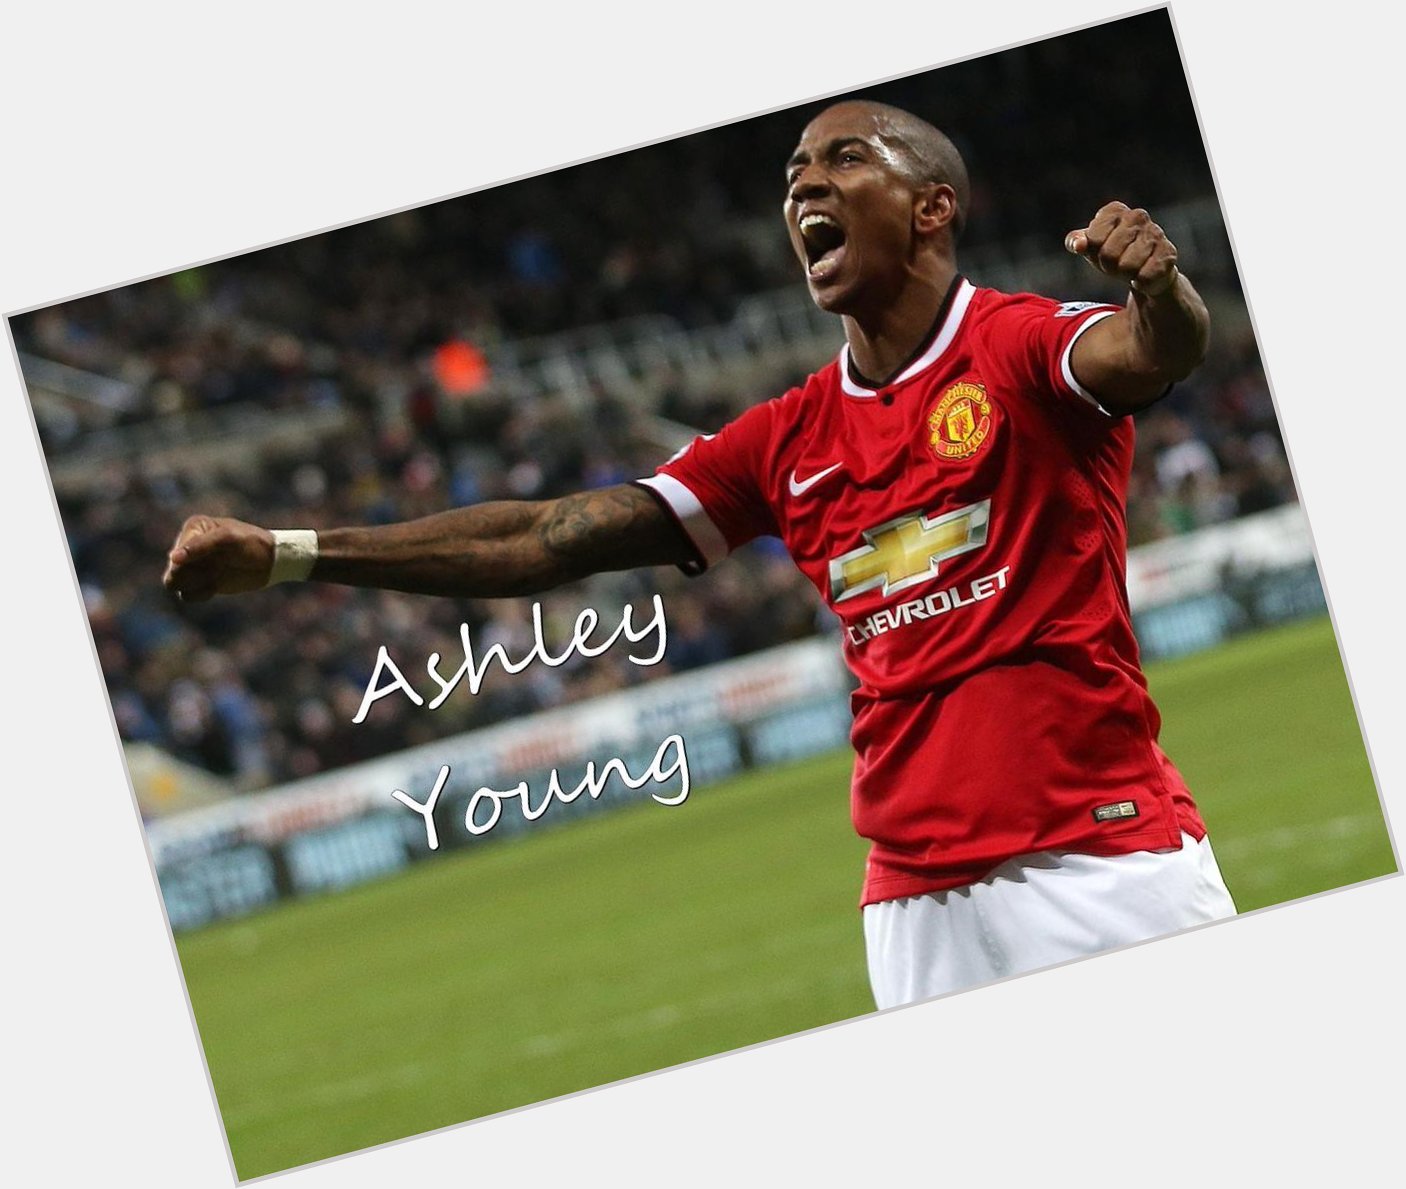 Happy birthday, Ashley Young!   Wish you continue your form of last season!  